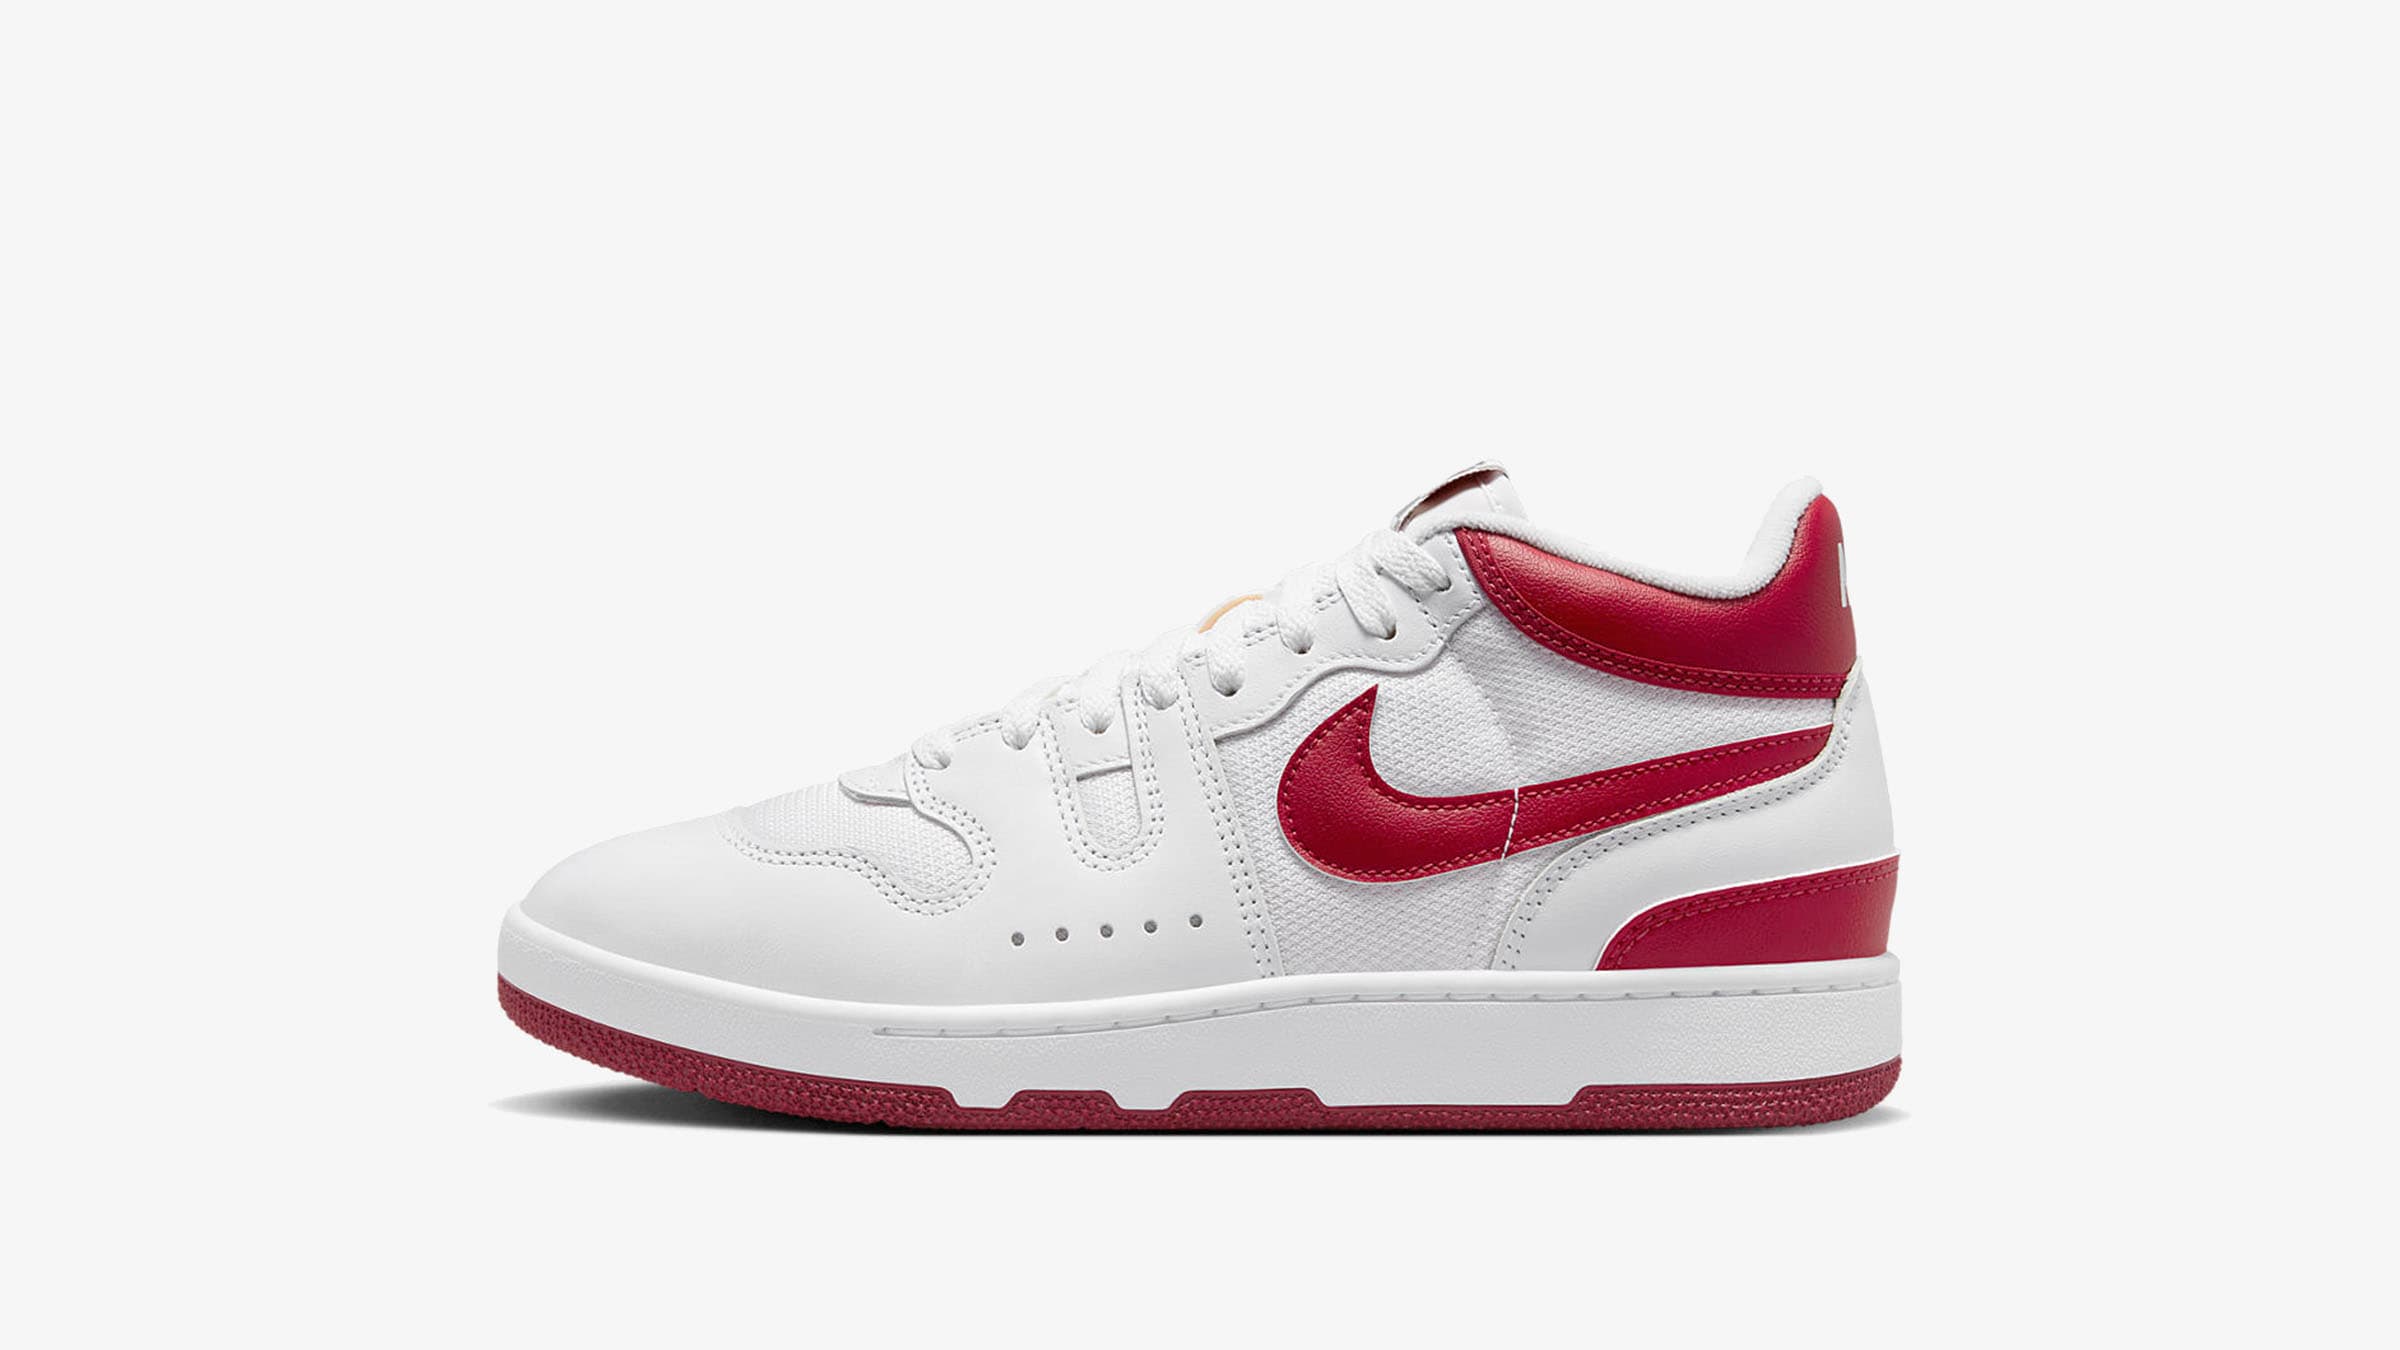 Nike Attack QS SP (White, Red & White) | END. Launches